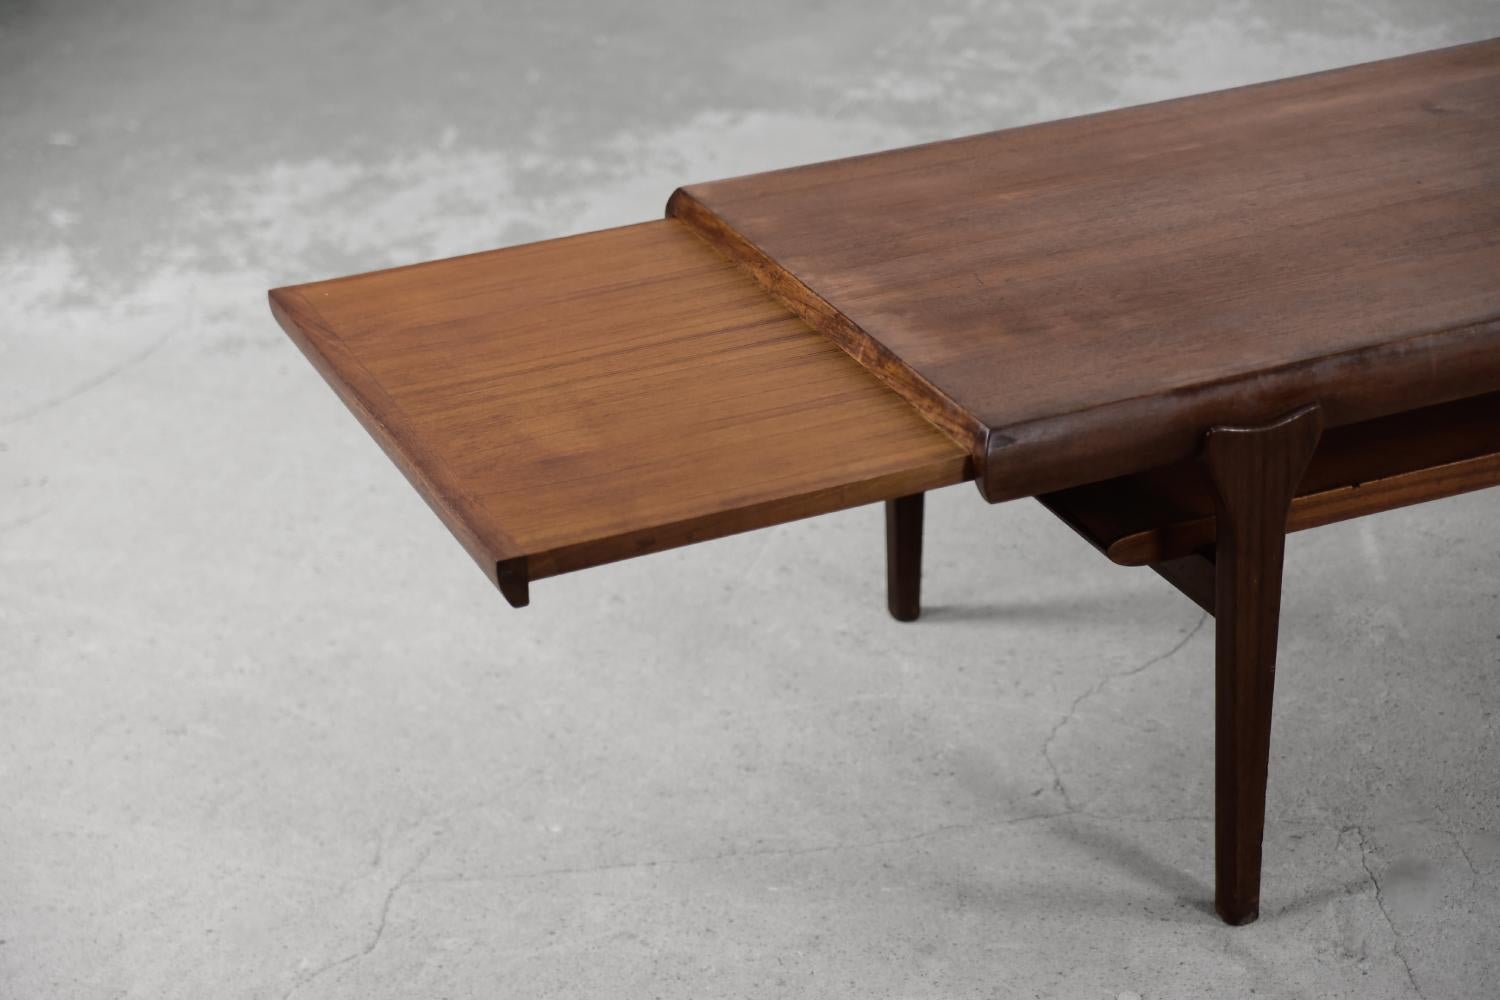 Vintage Mid-century Modern Scandinavian Extendable Teak Coffee Table with Drawer For Sale 8